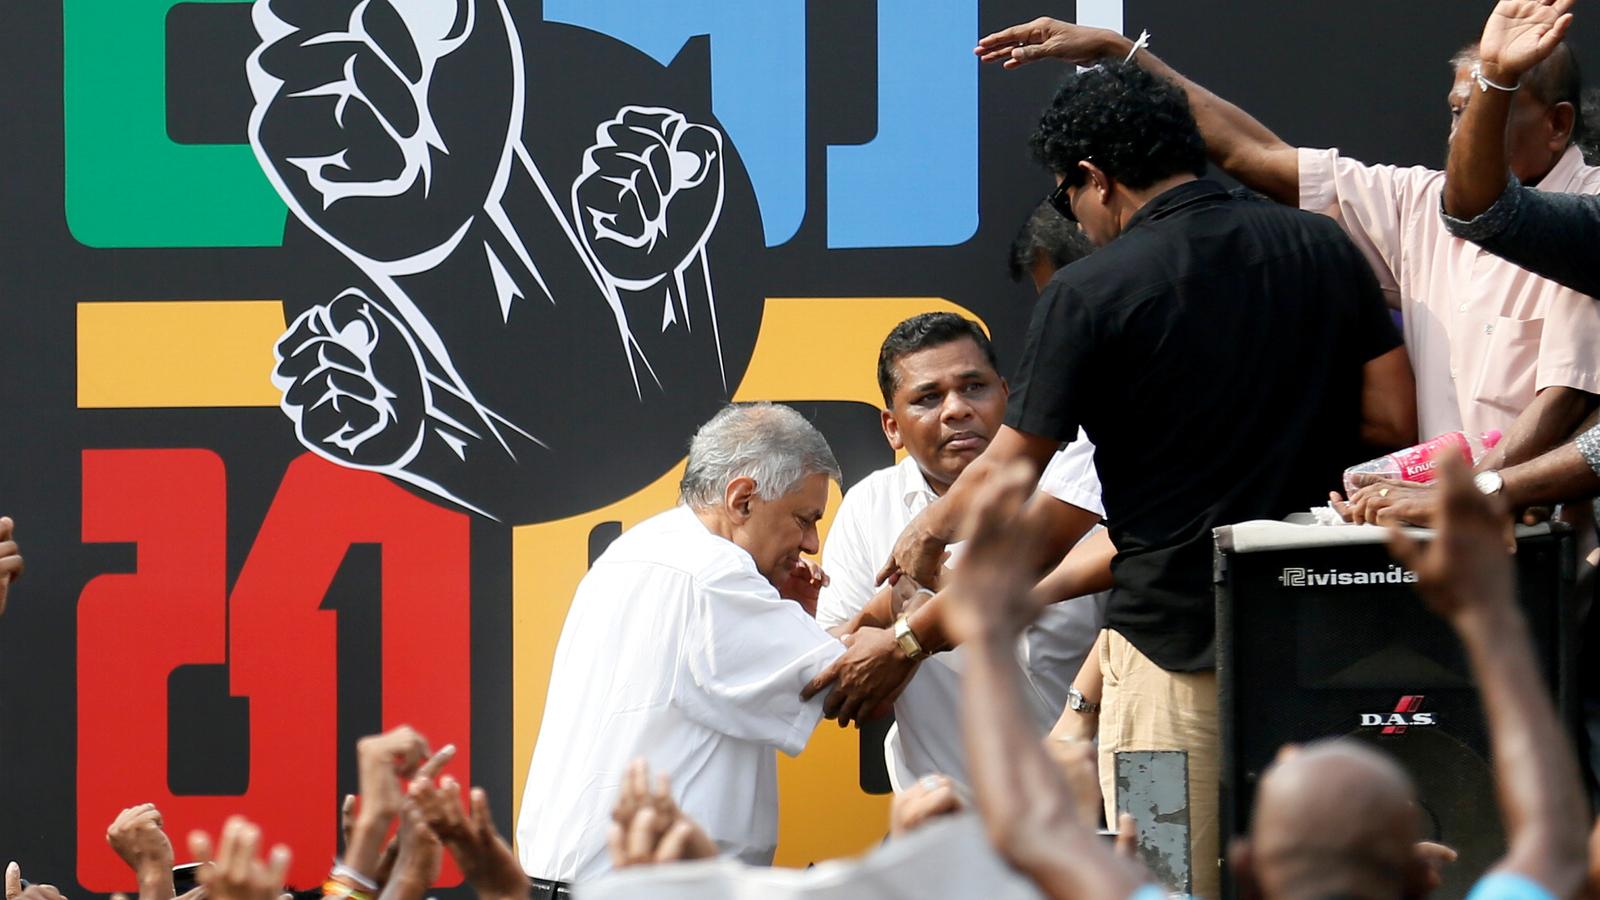 Prime Minister Ranil Wickremesinghe steps onto stage in front of colorful mural with black fist symbols 